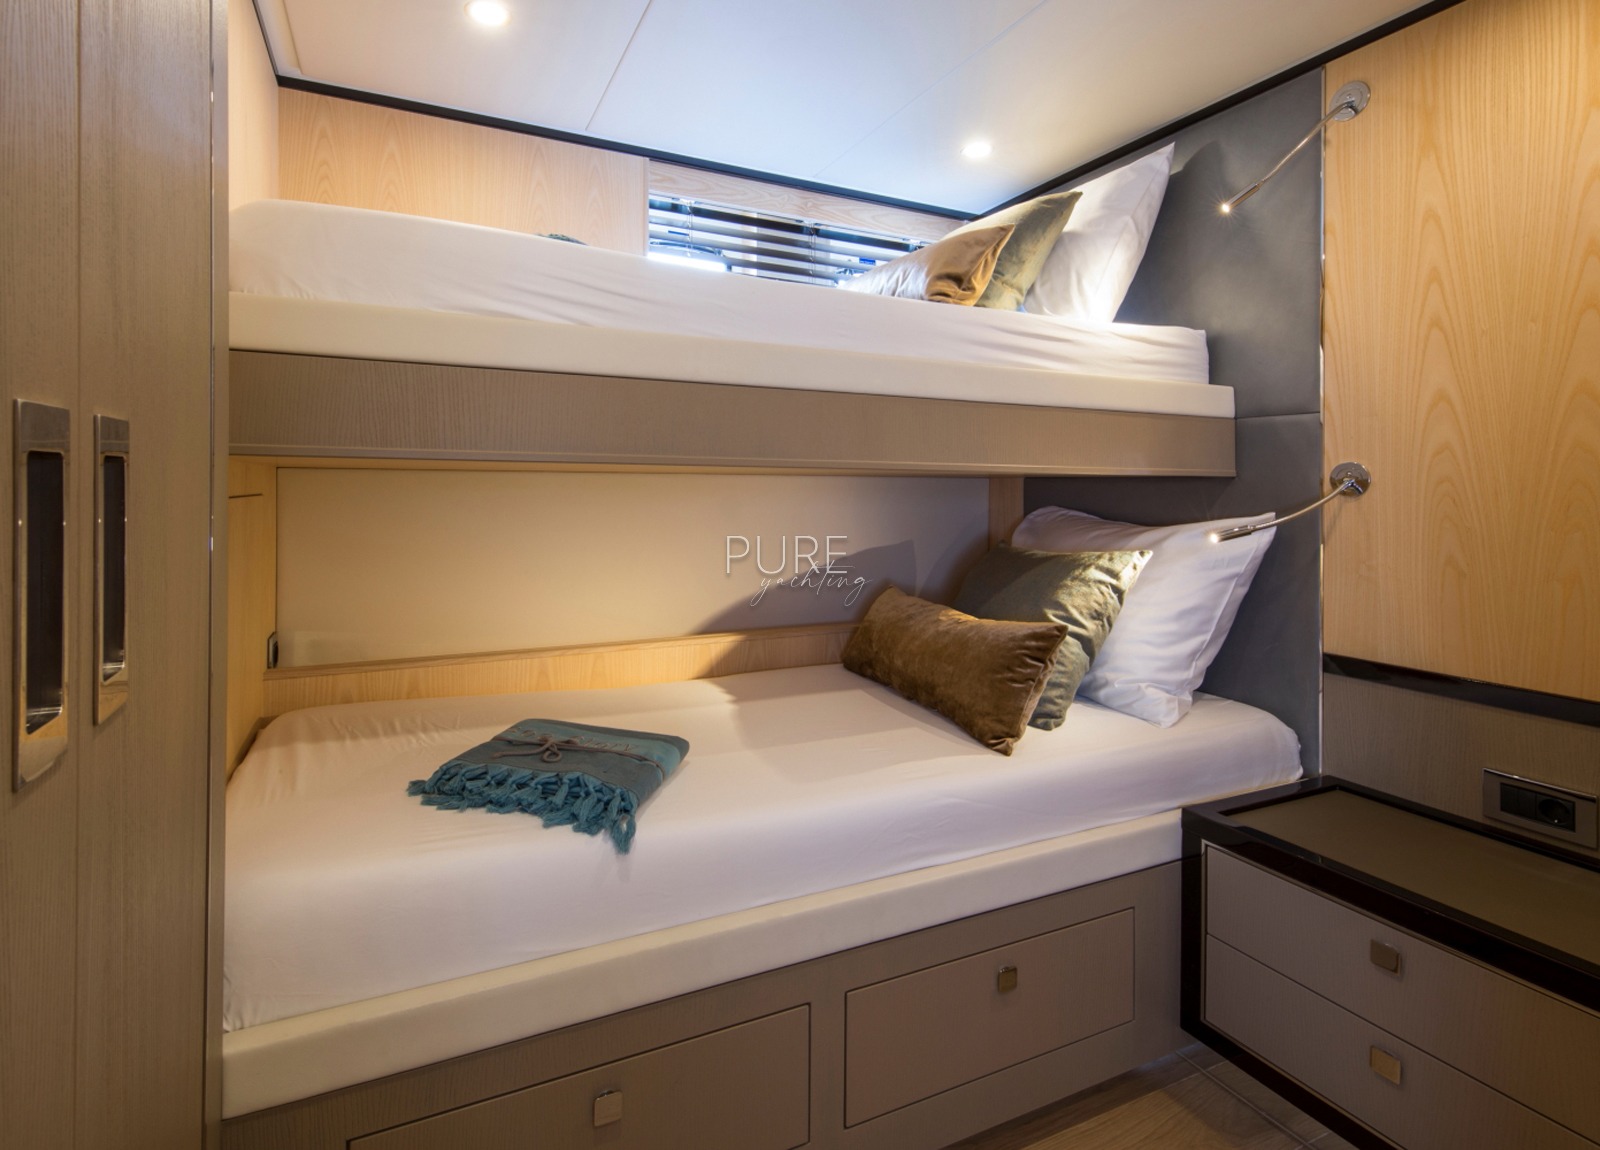 two bed cabin luxury yacht vanquish 82 sea story